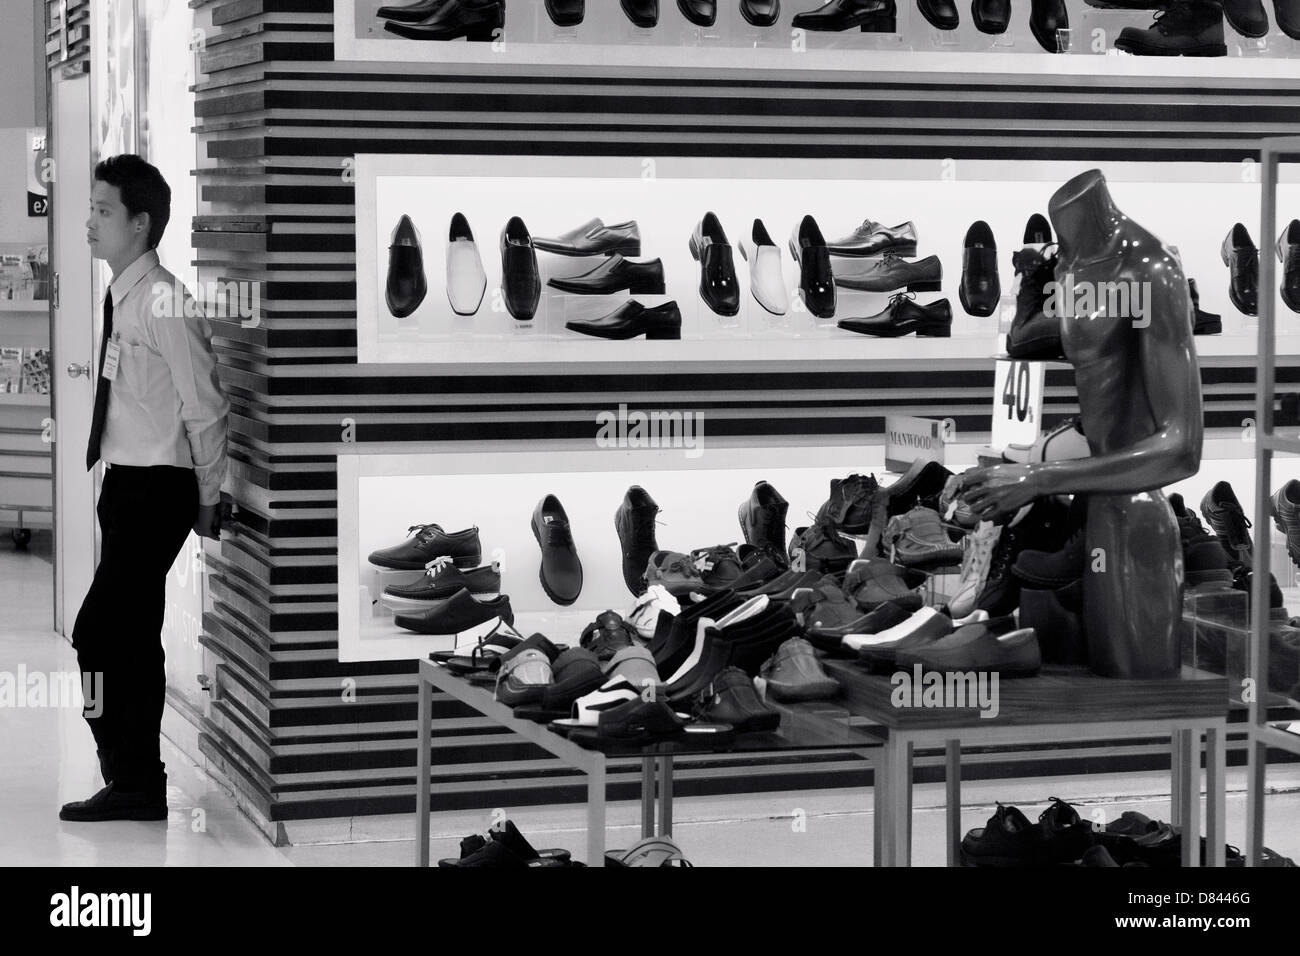 shoe department in the mall